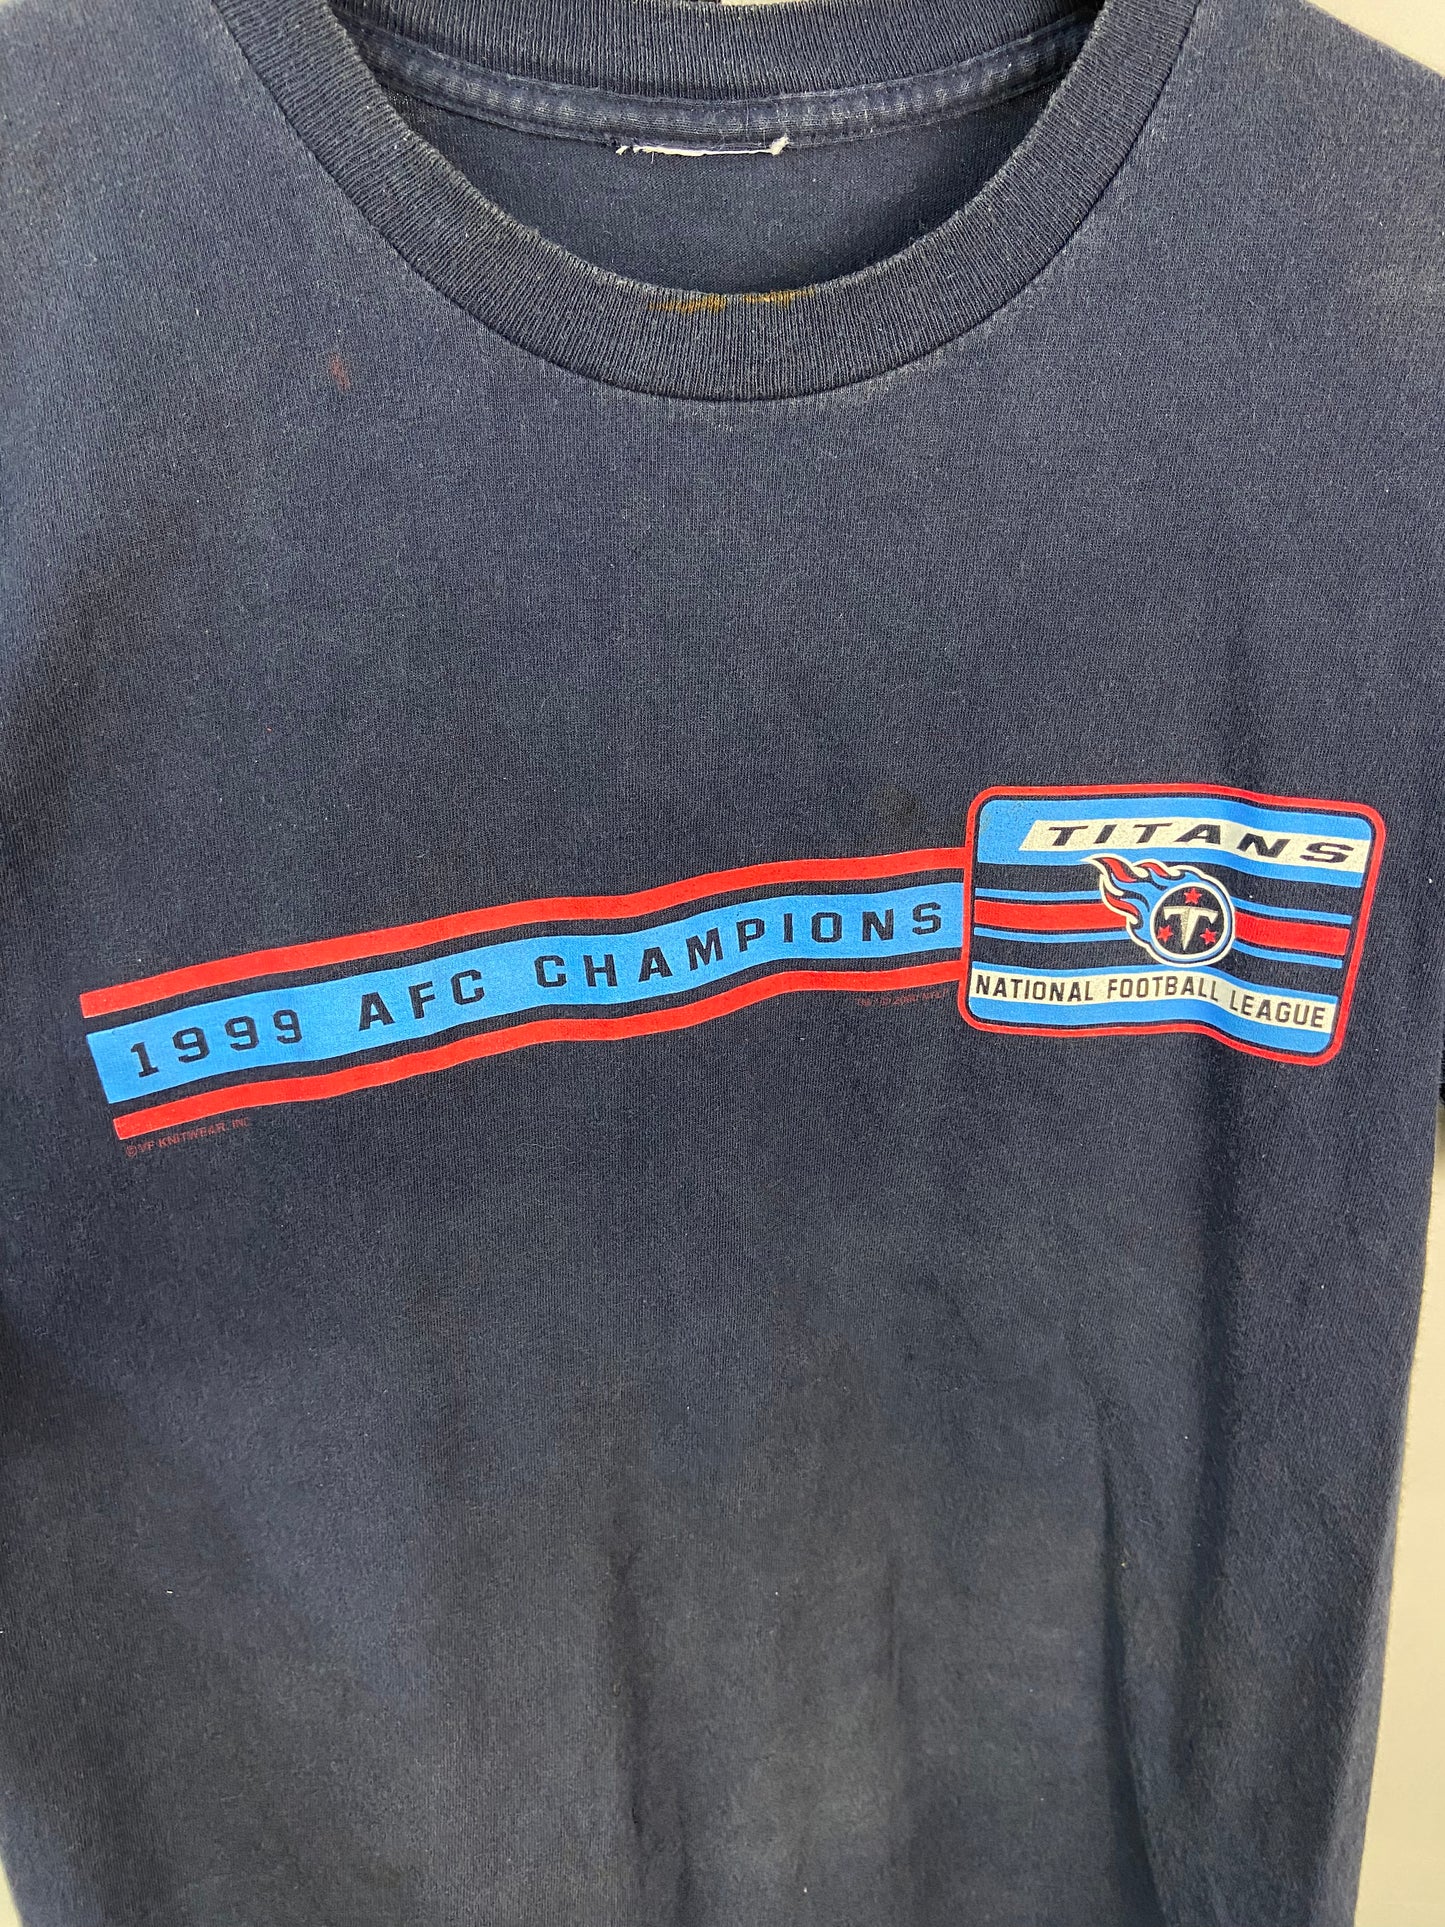 VTG Tennessee Titans 1999 AFC Champions Tee Sz S